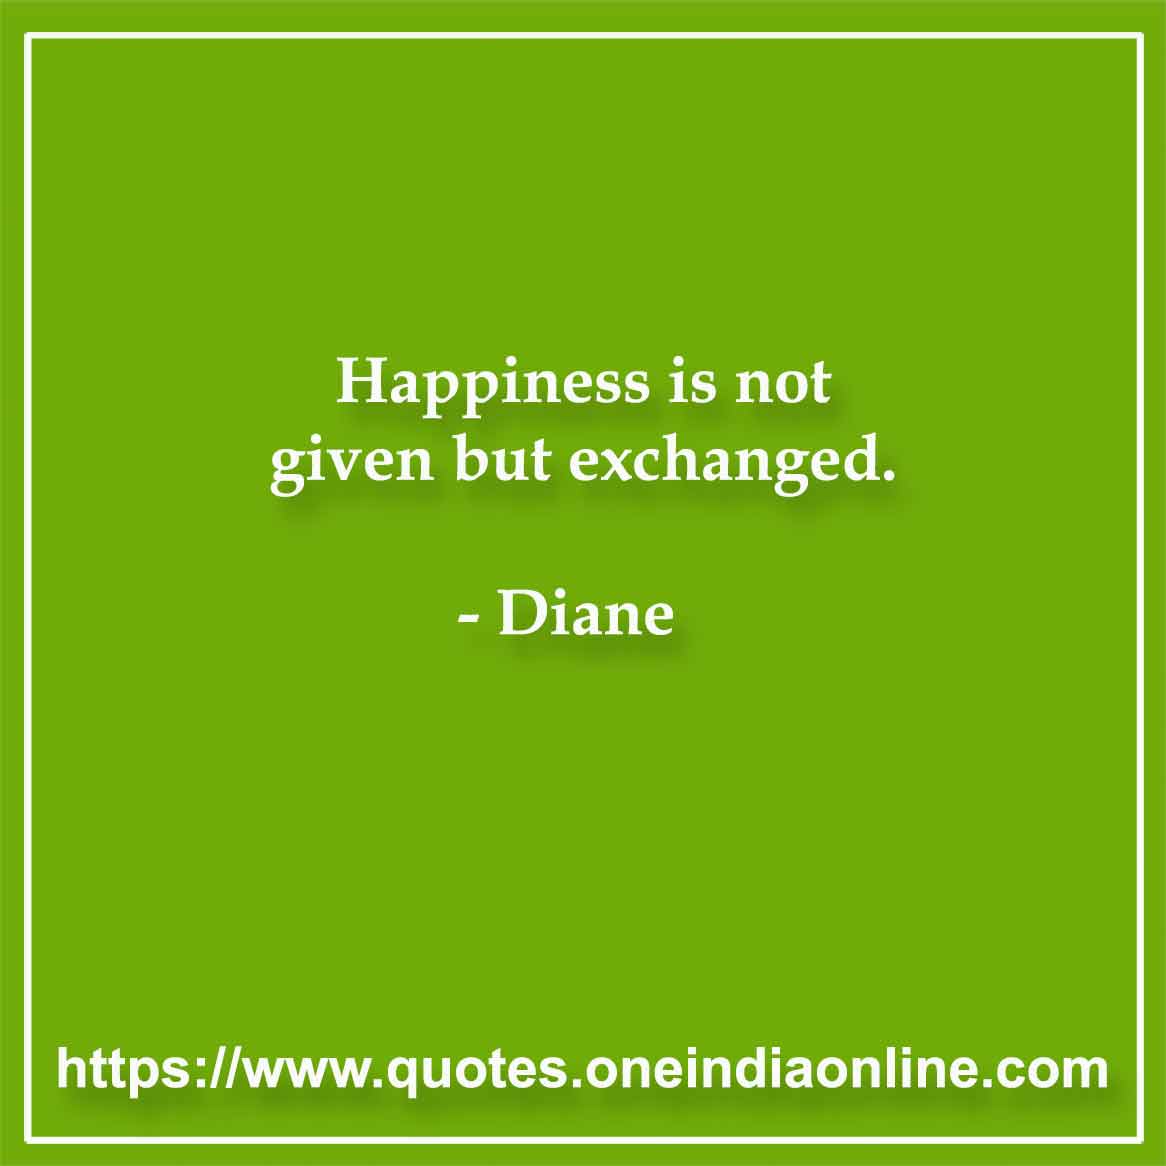 Happiness is not given but exchanged.

- Diane